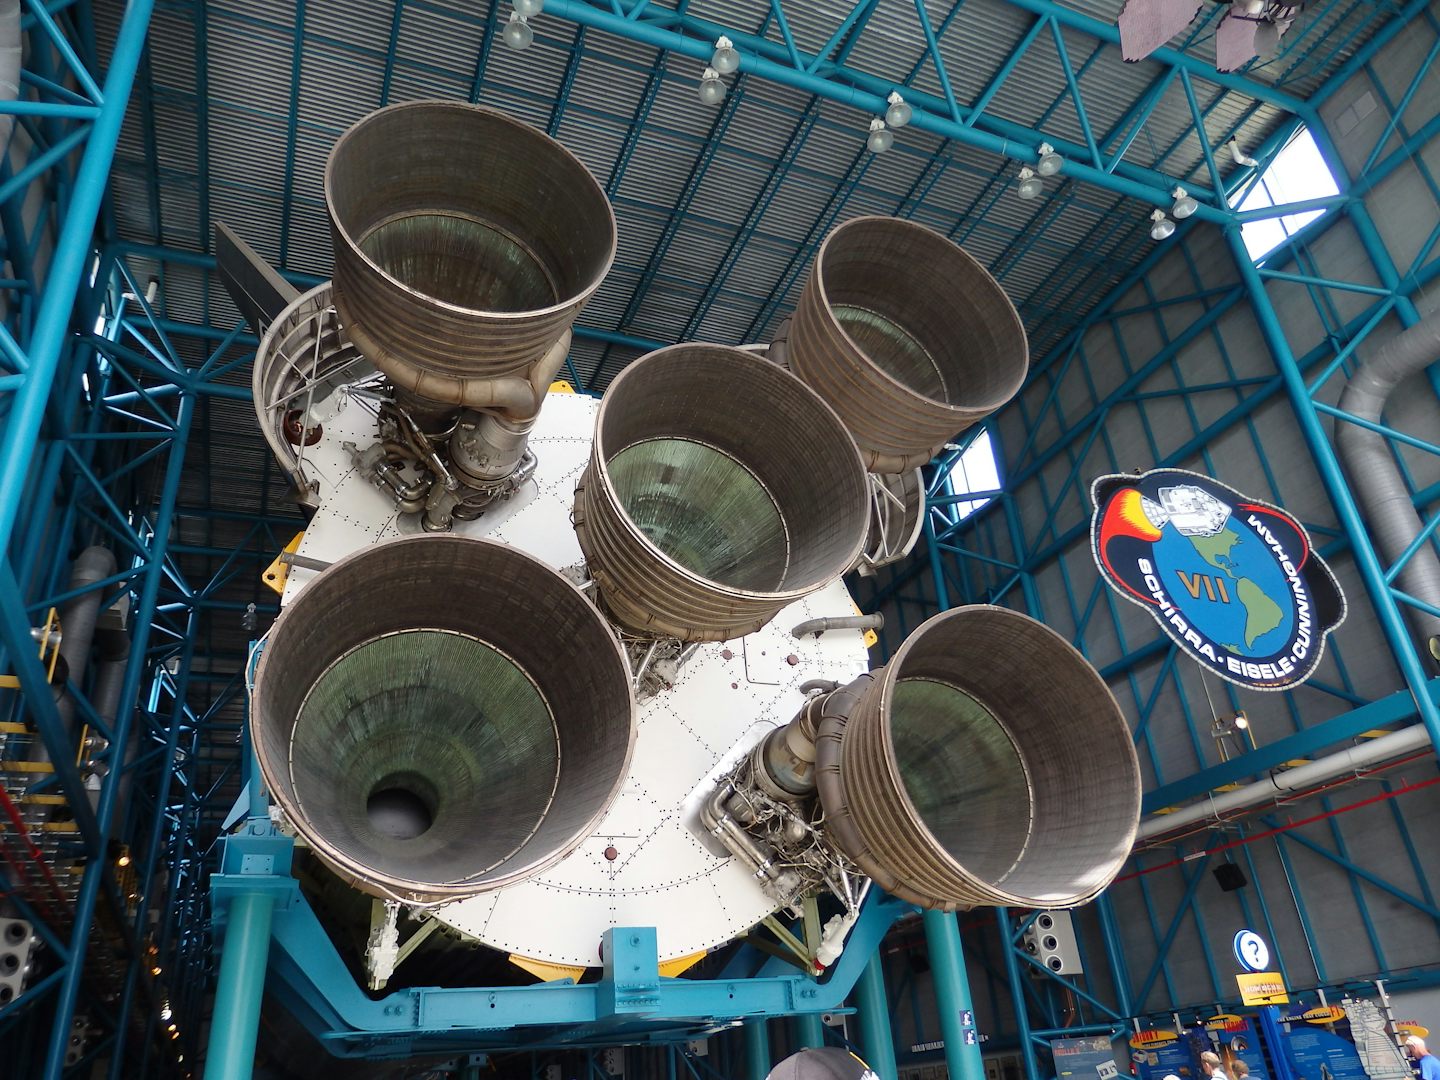 Kennedy Space Center - aft burners Apollo